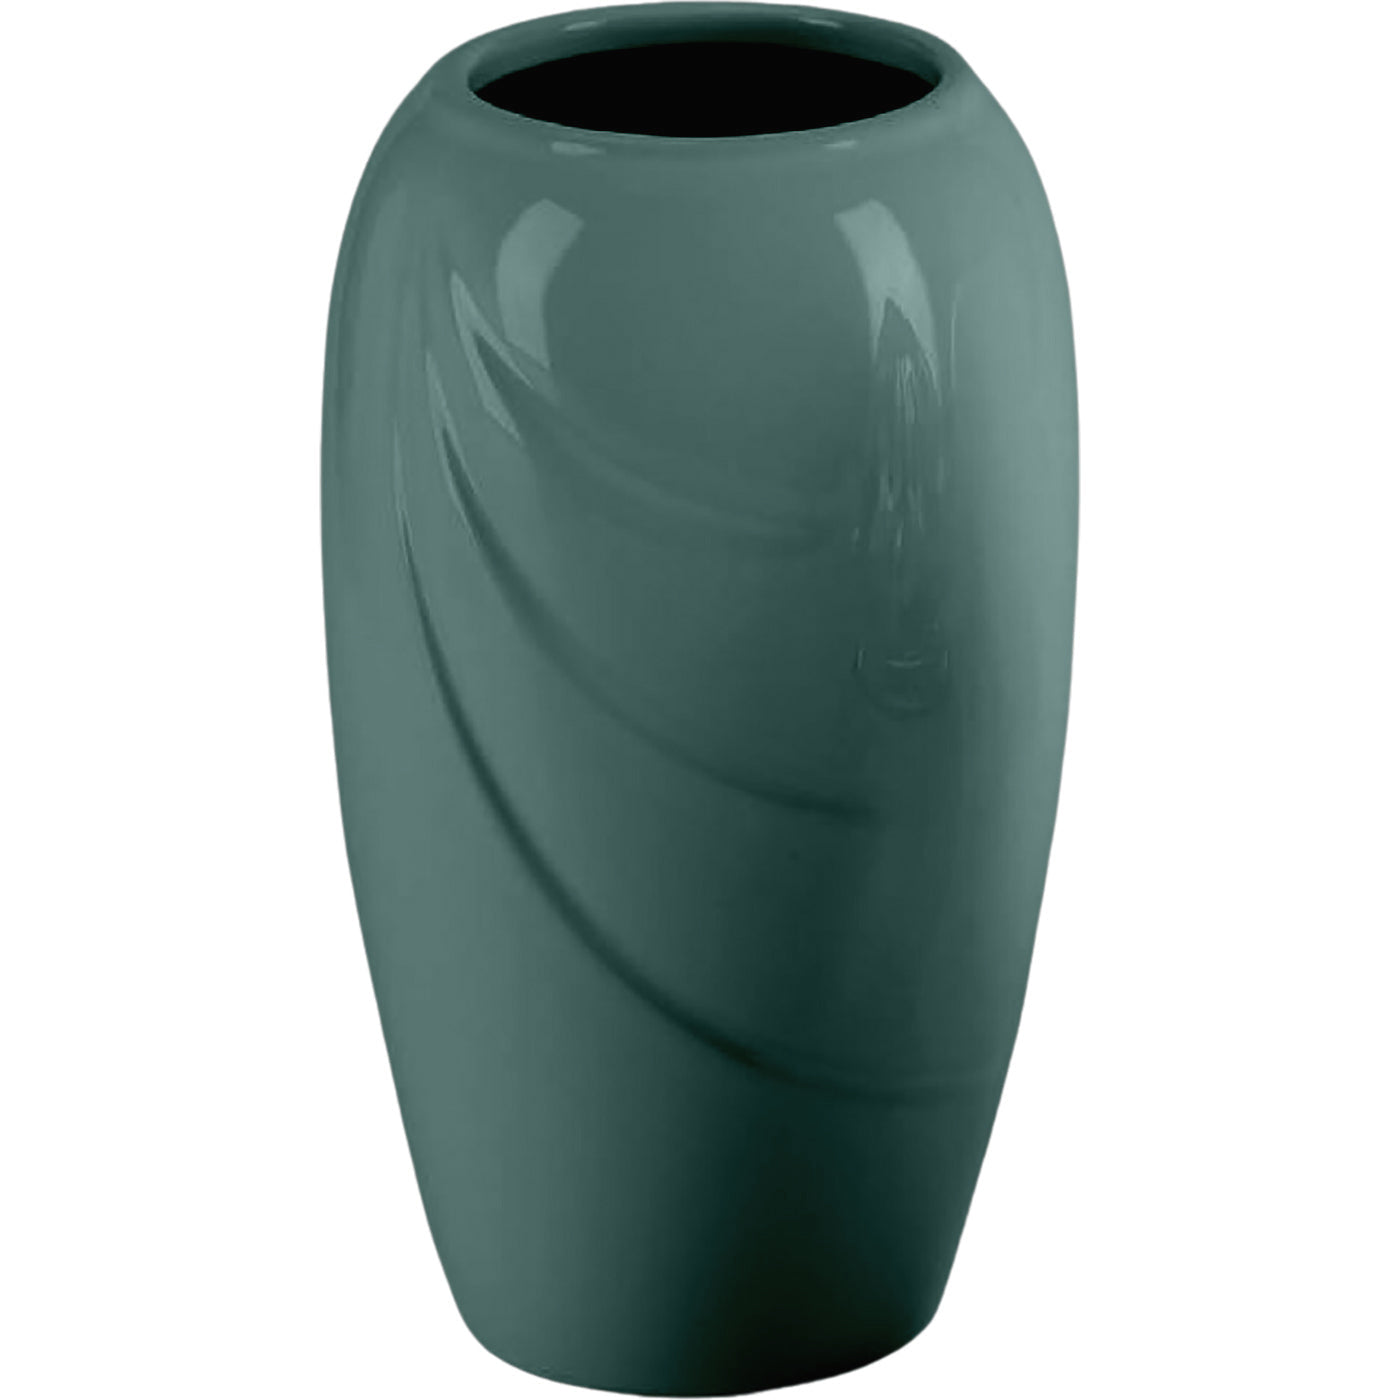 Grave vase Ecotre green 21x13cm - 8.3x5.1in In green porcelain, ground attached ECO150T/V